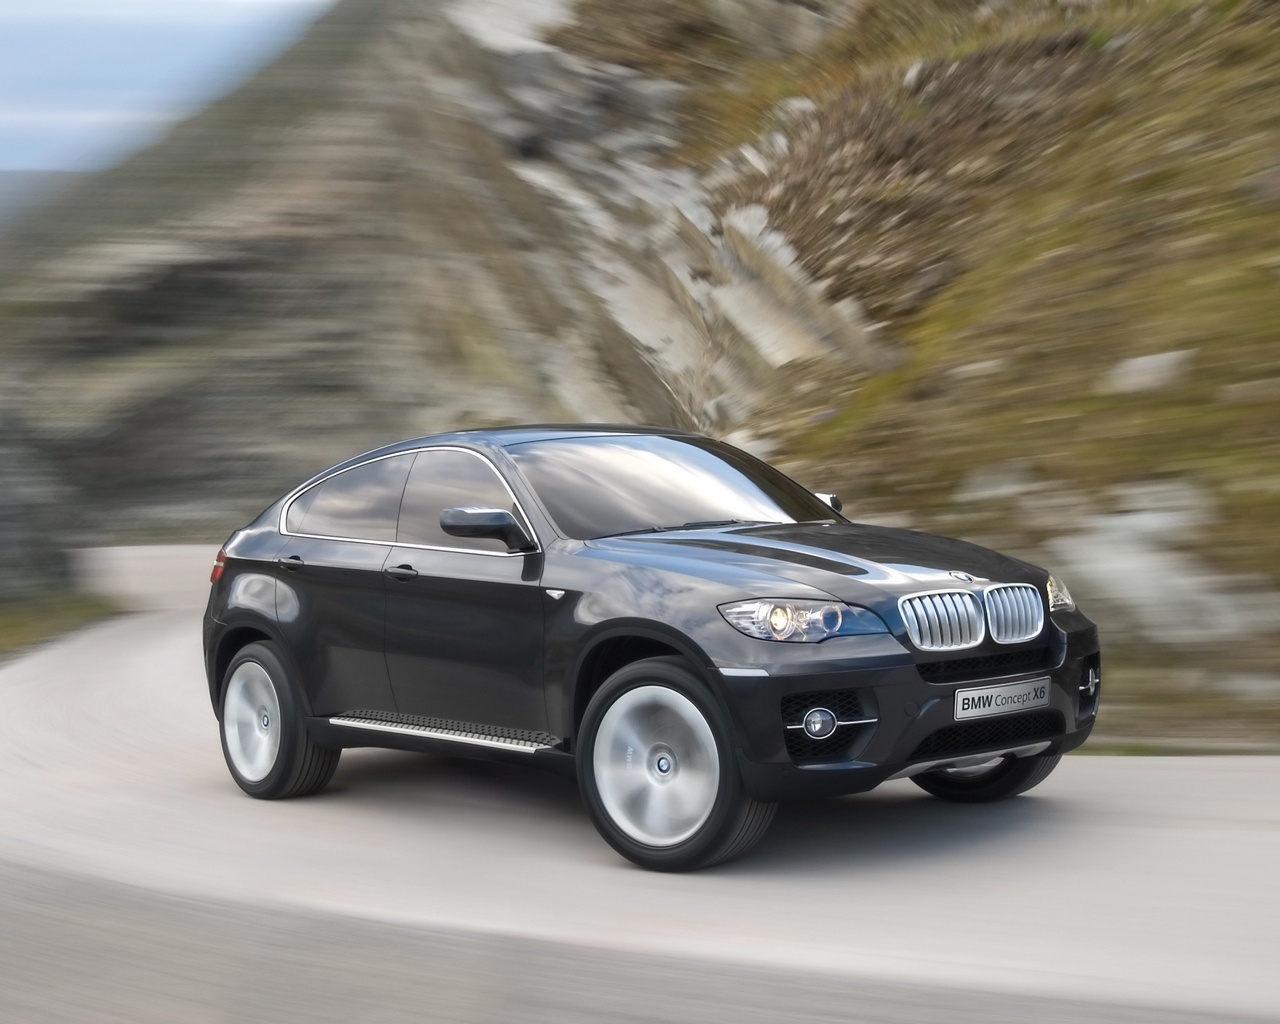 BMW Concept X6 Speed 2007 for 1280 x 1024 resolution